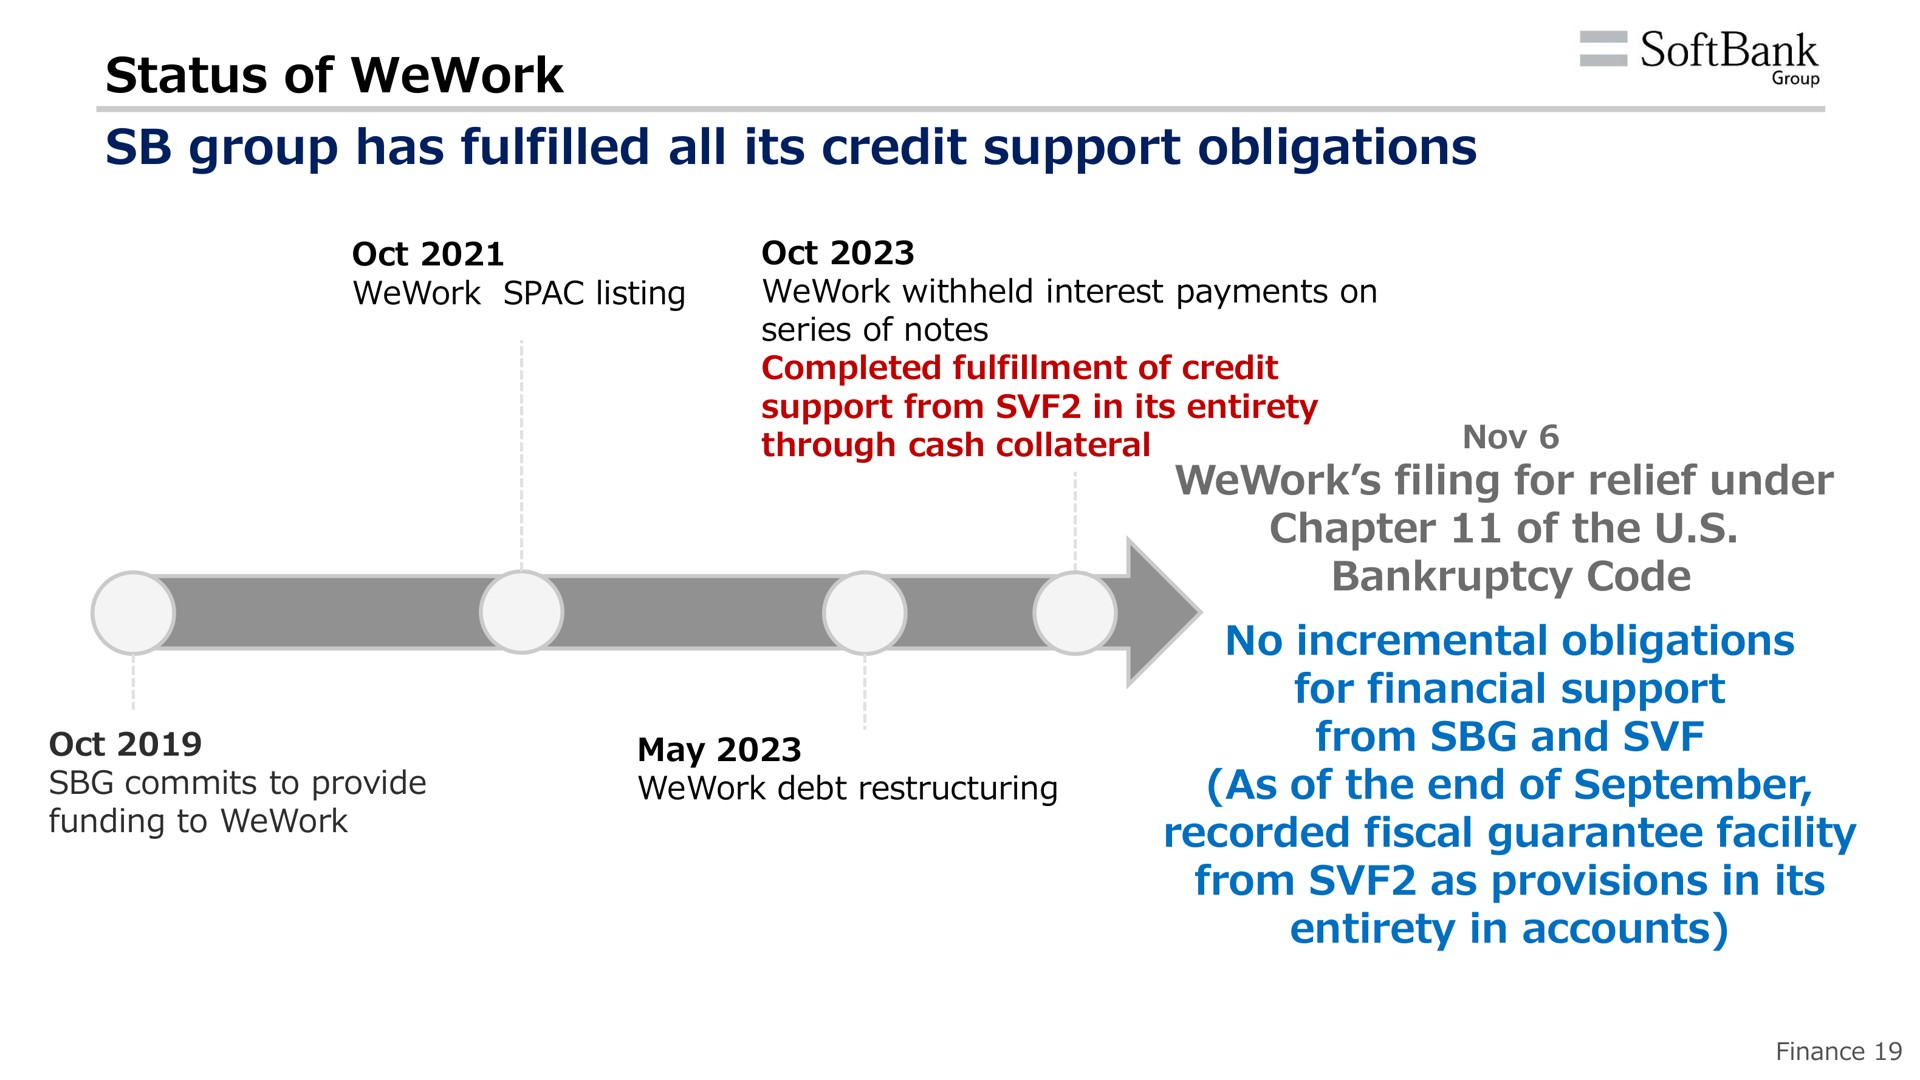 status of group has all its credit support obligations recorded fiscal guarantee facility | SoftBank